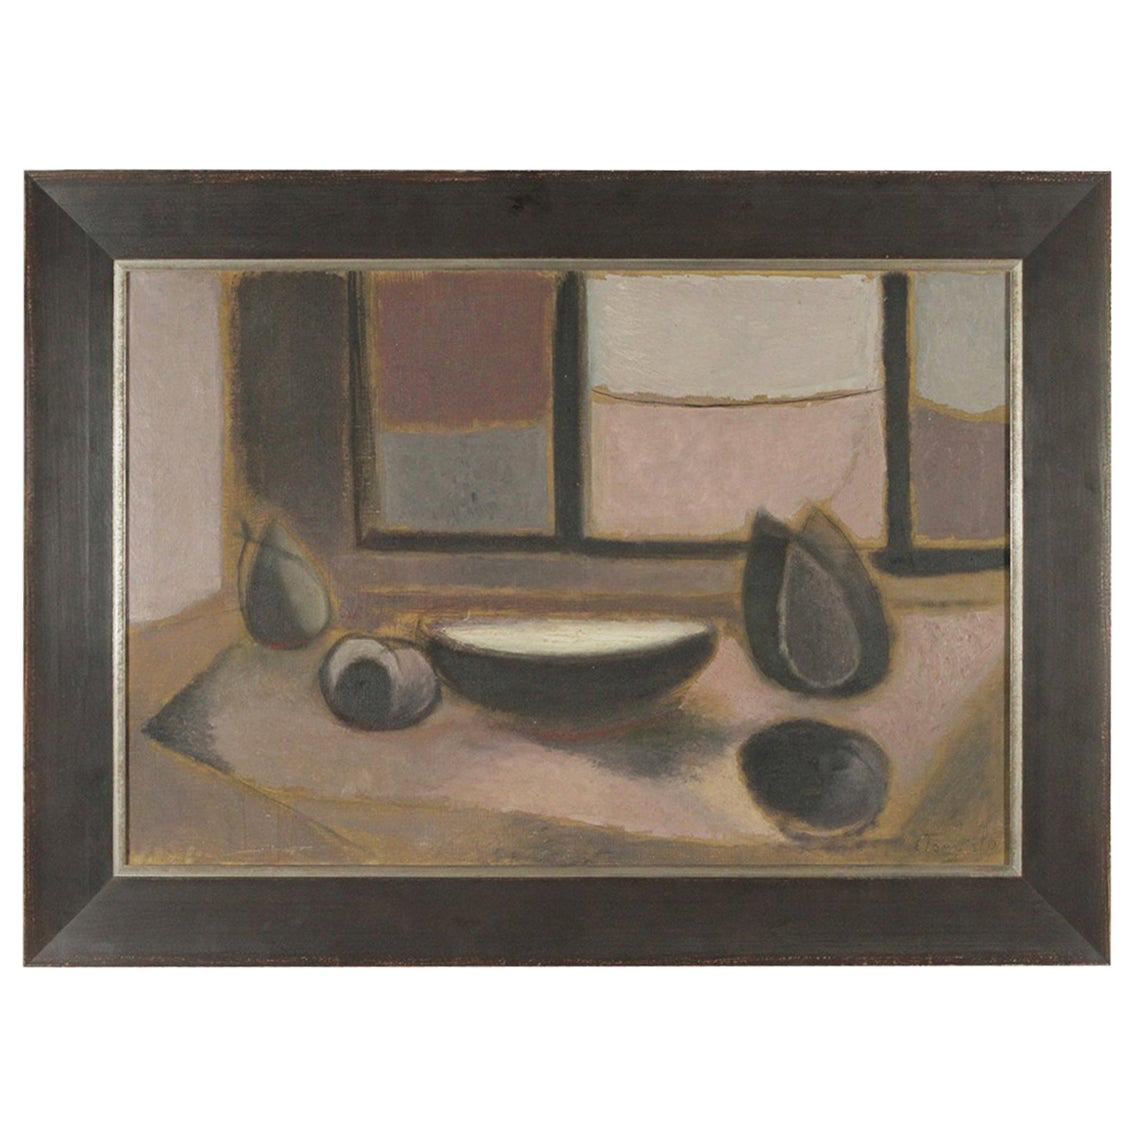 Modern Oil on Canvas Still Life by Eugenio Tomiolo, circa 1954